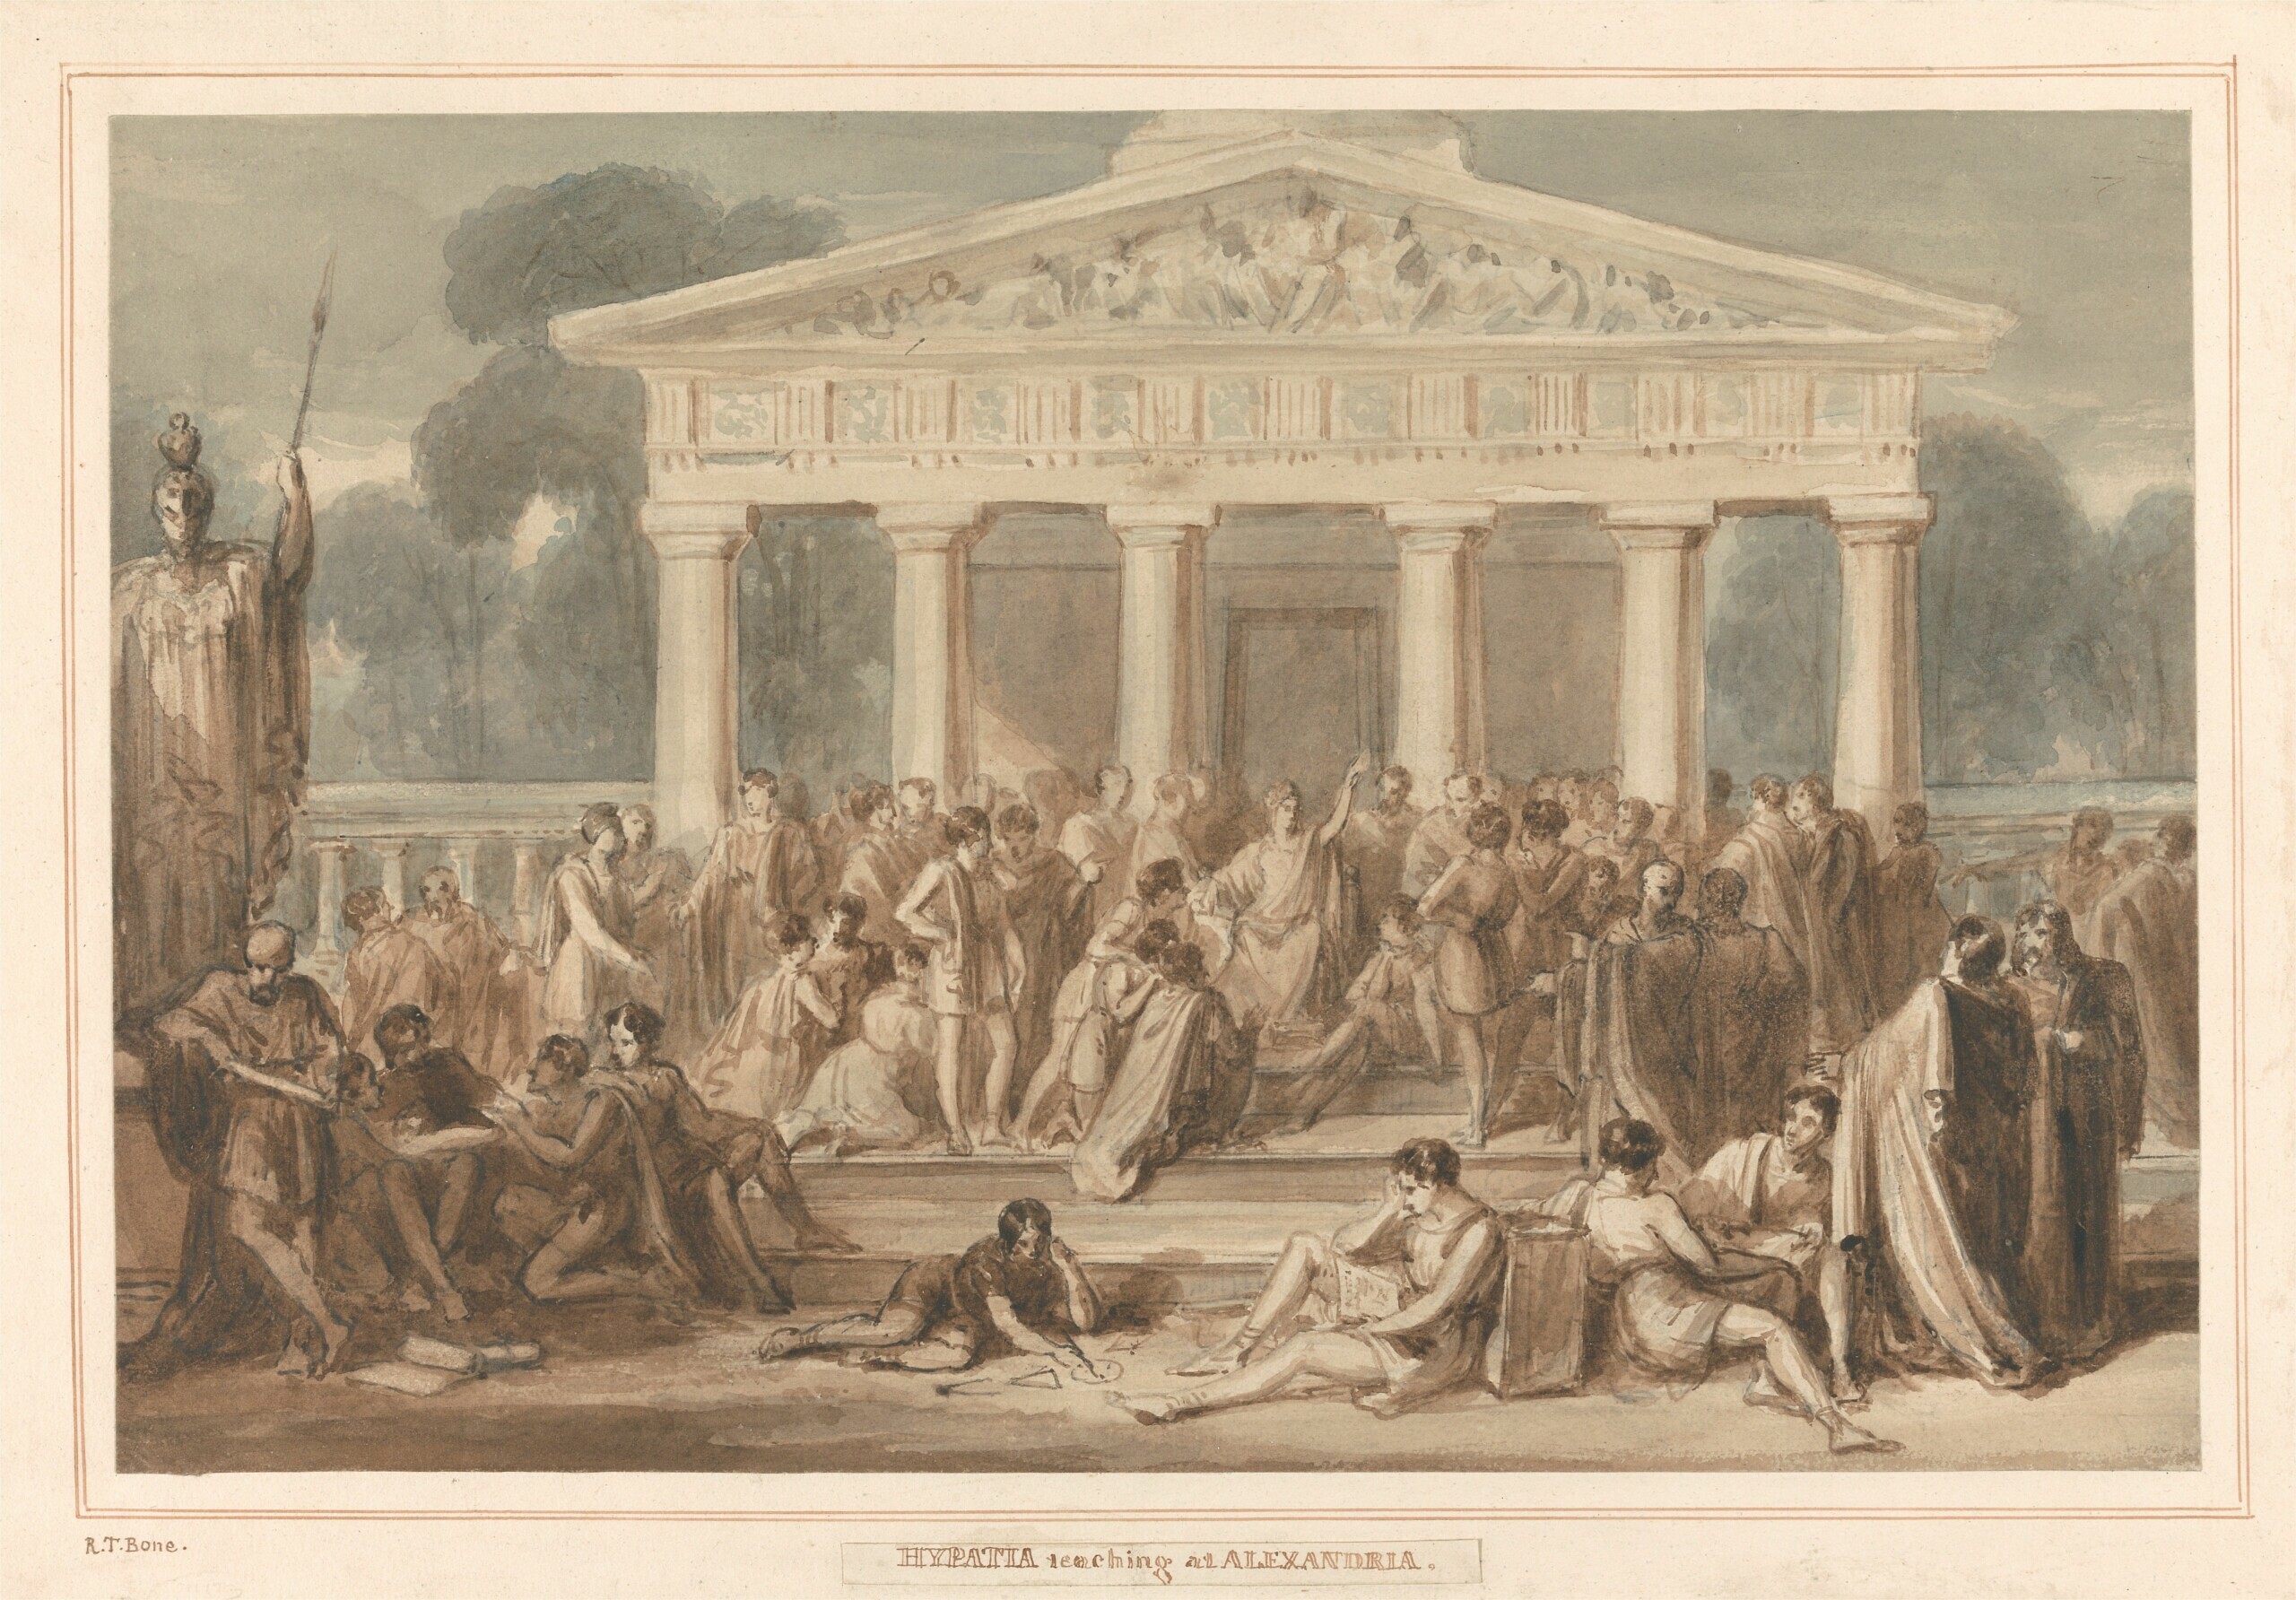 Watercolor and brown ink image of Hypatia teaching at Alexandria, where she is surrounded by a crowd of interested people, seated in front of a classical building.